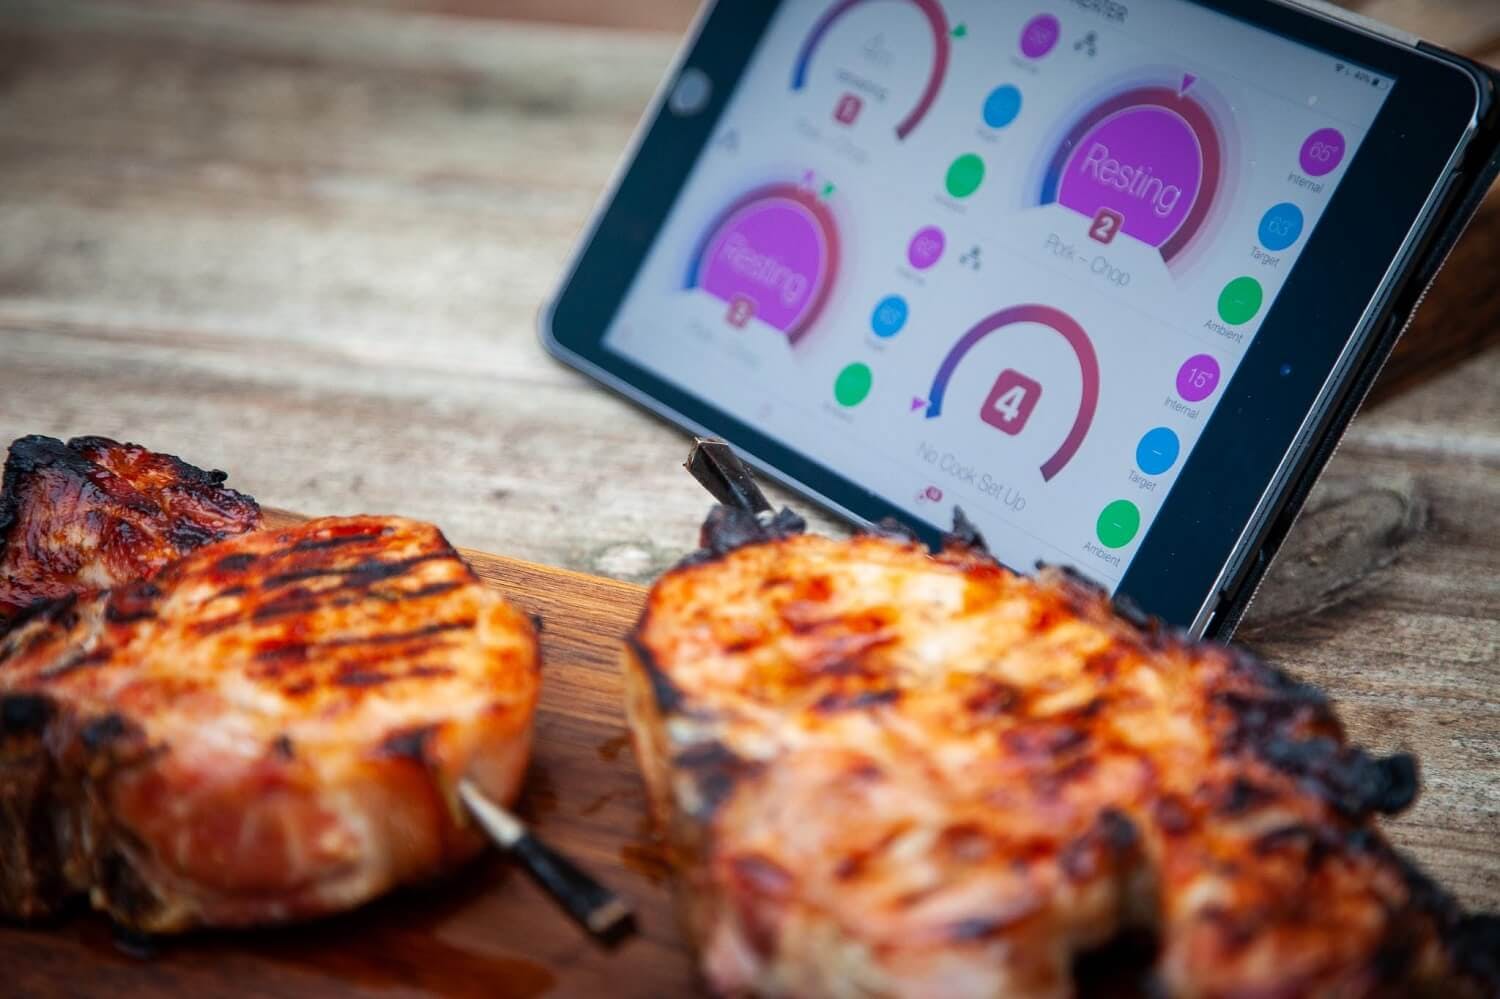 Never overcook steak again with this bluetooth meat thermometer